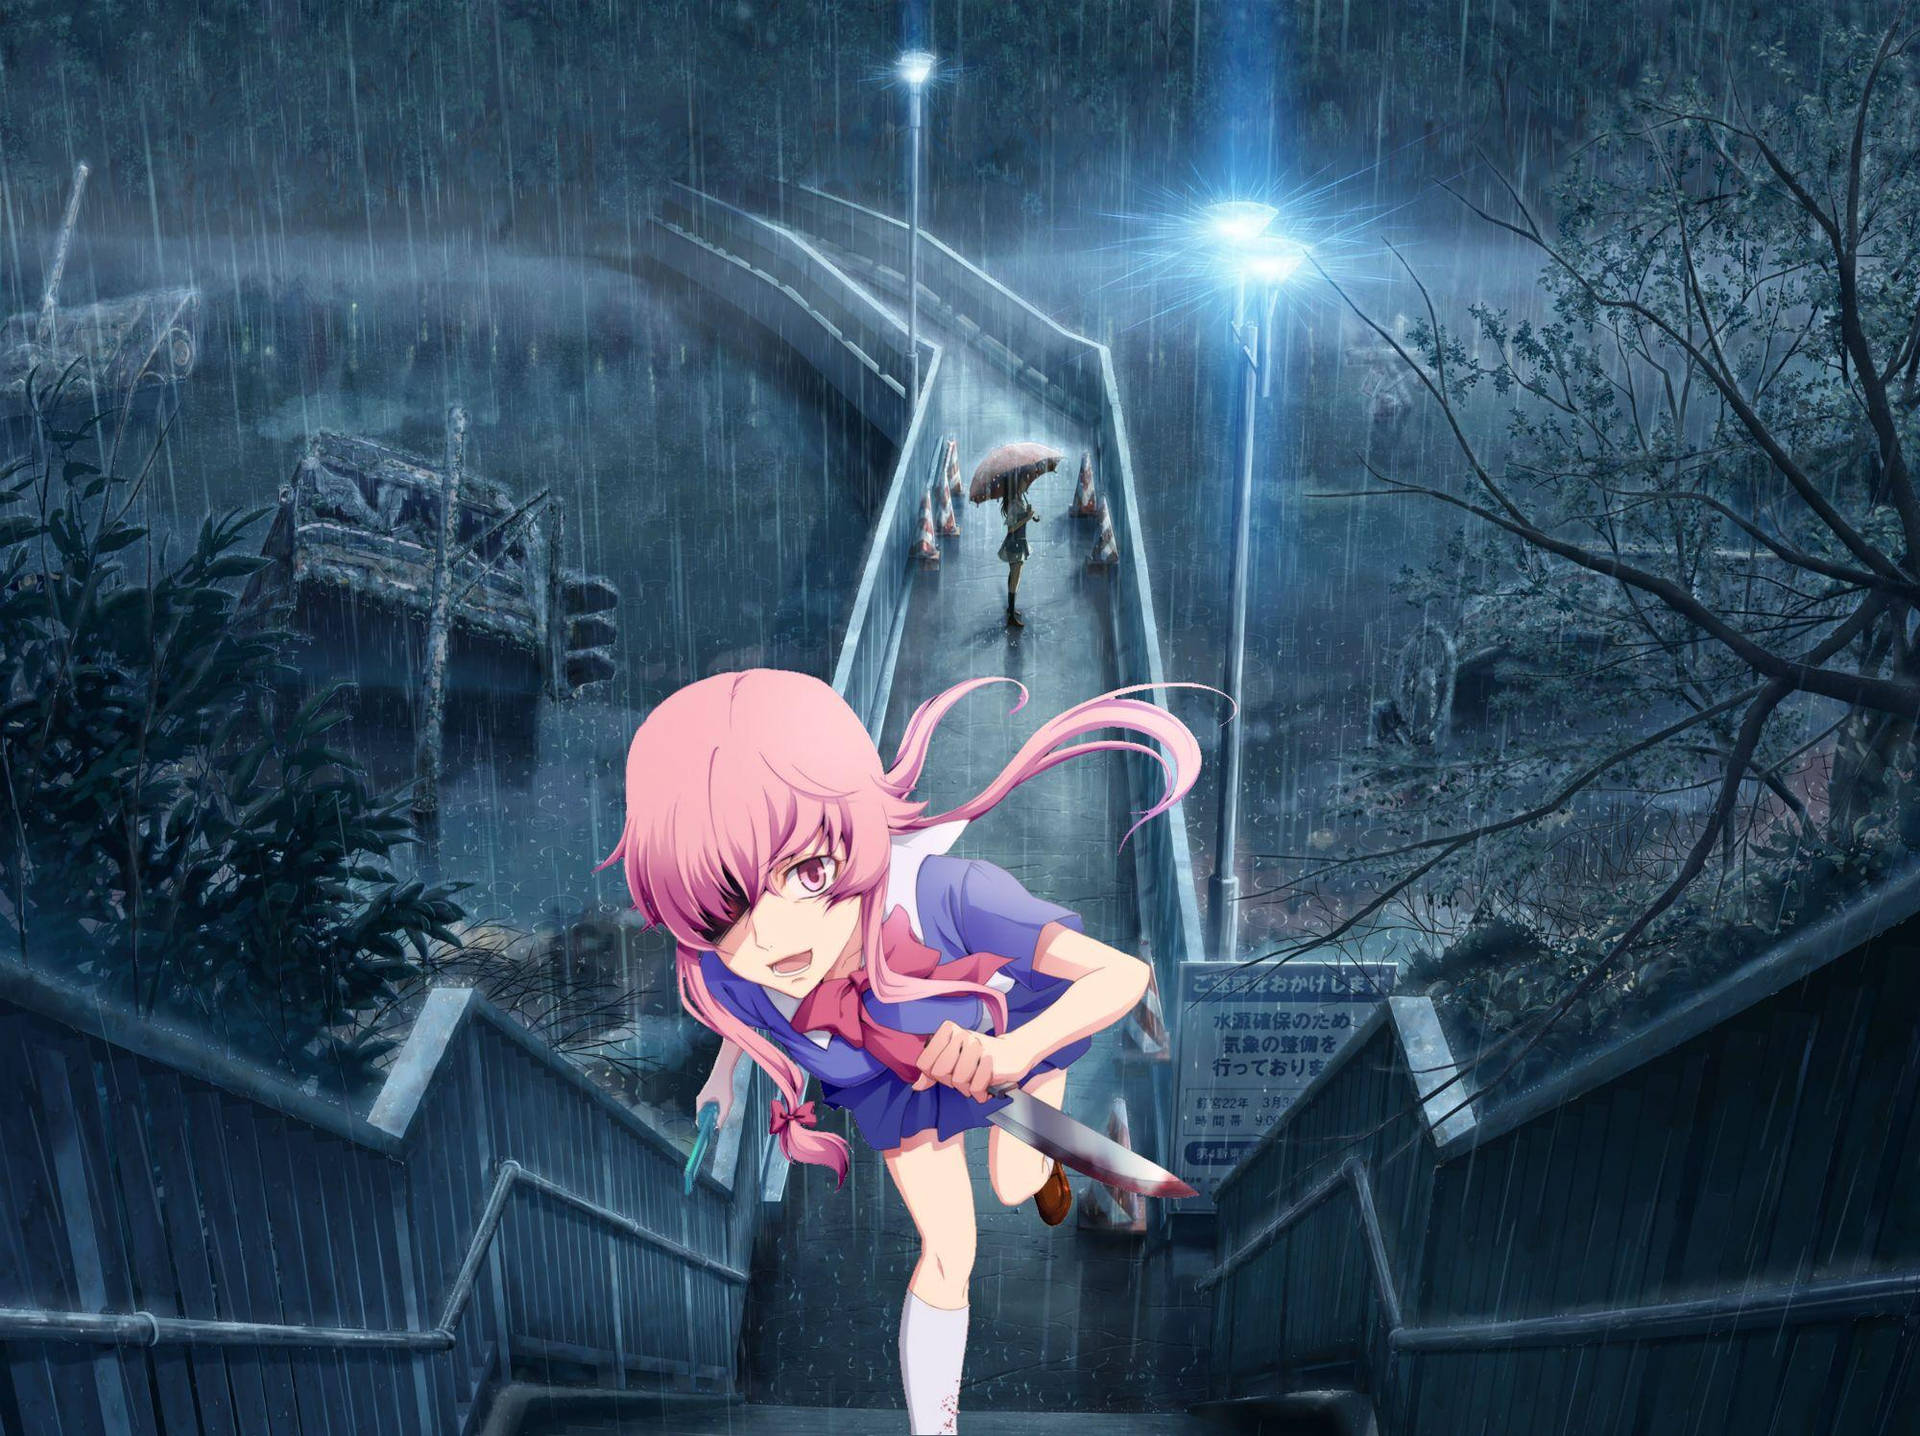 Caption: Yuno Gasai from Future Diary - Intensity Captured in One Image Wallpaper